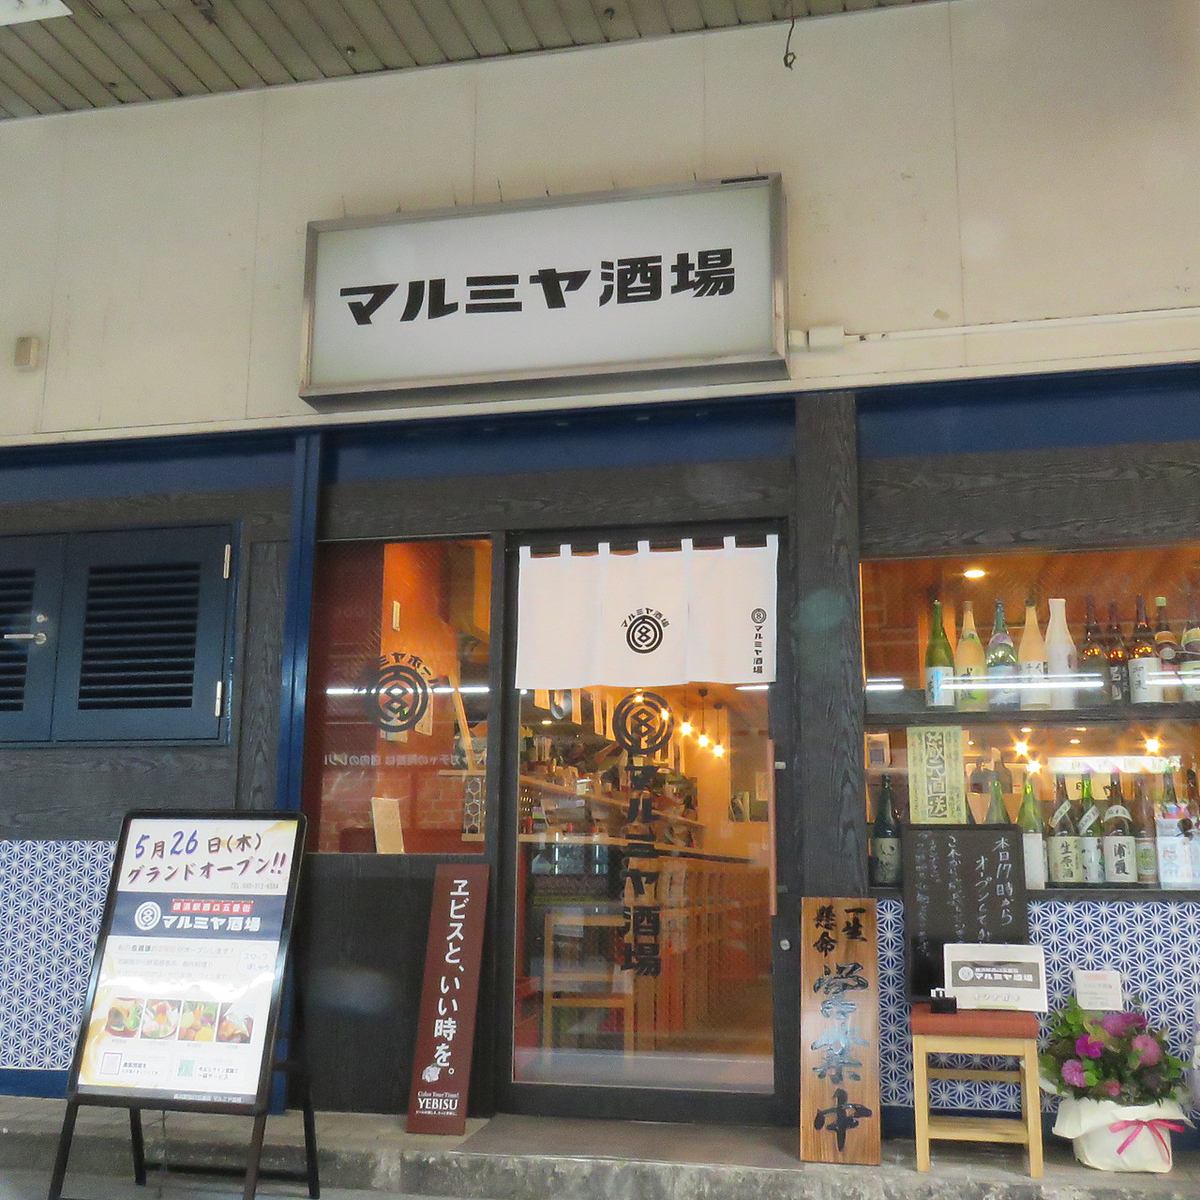 Enjoy seasonal fish in a great location just 30 seconds on foot from Yokohama Station!